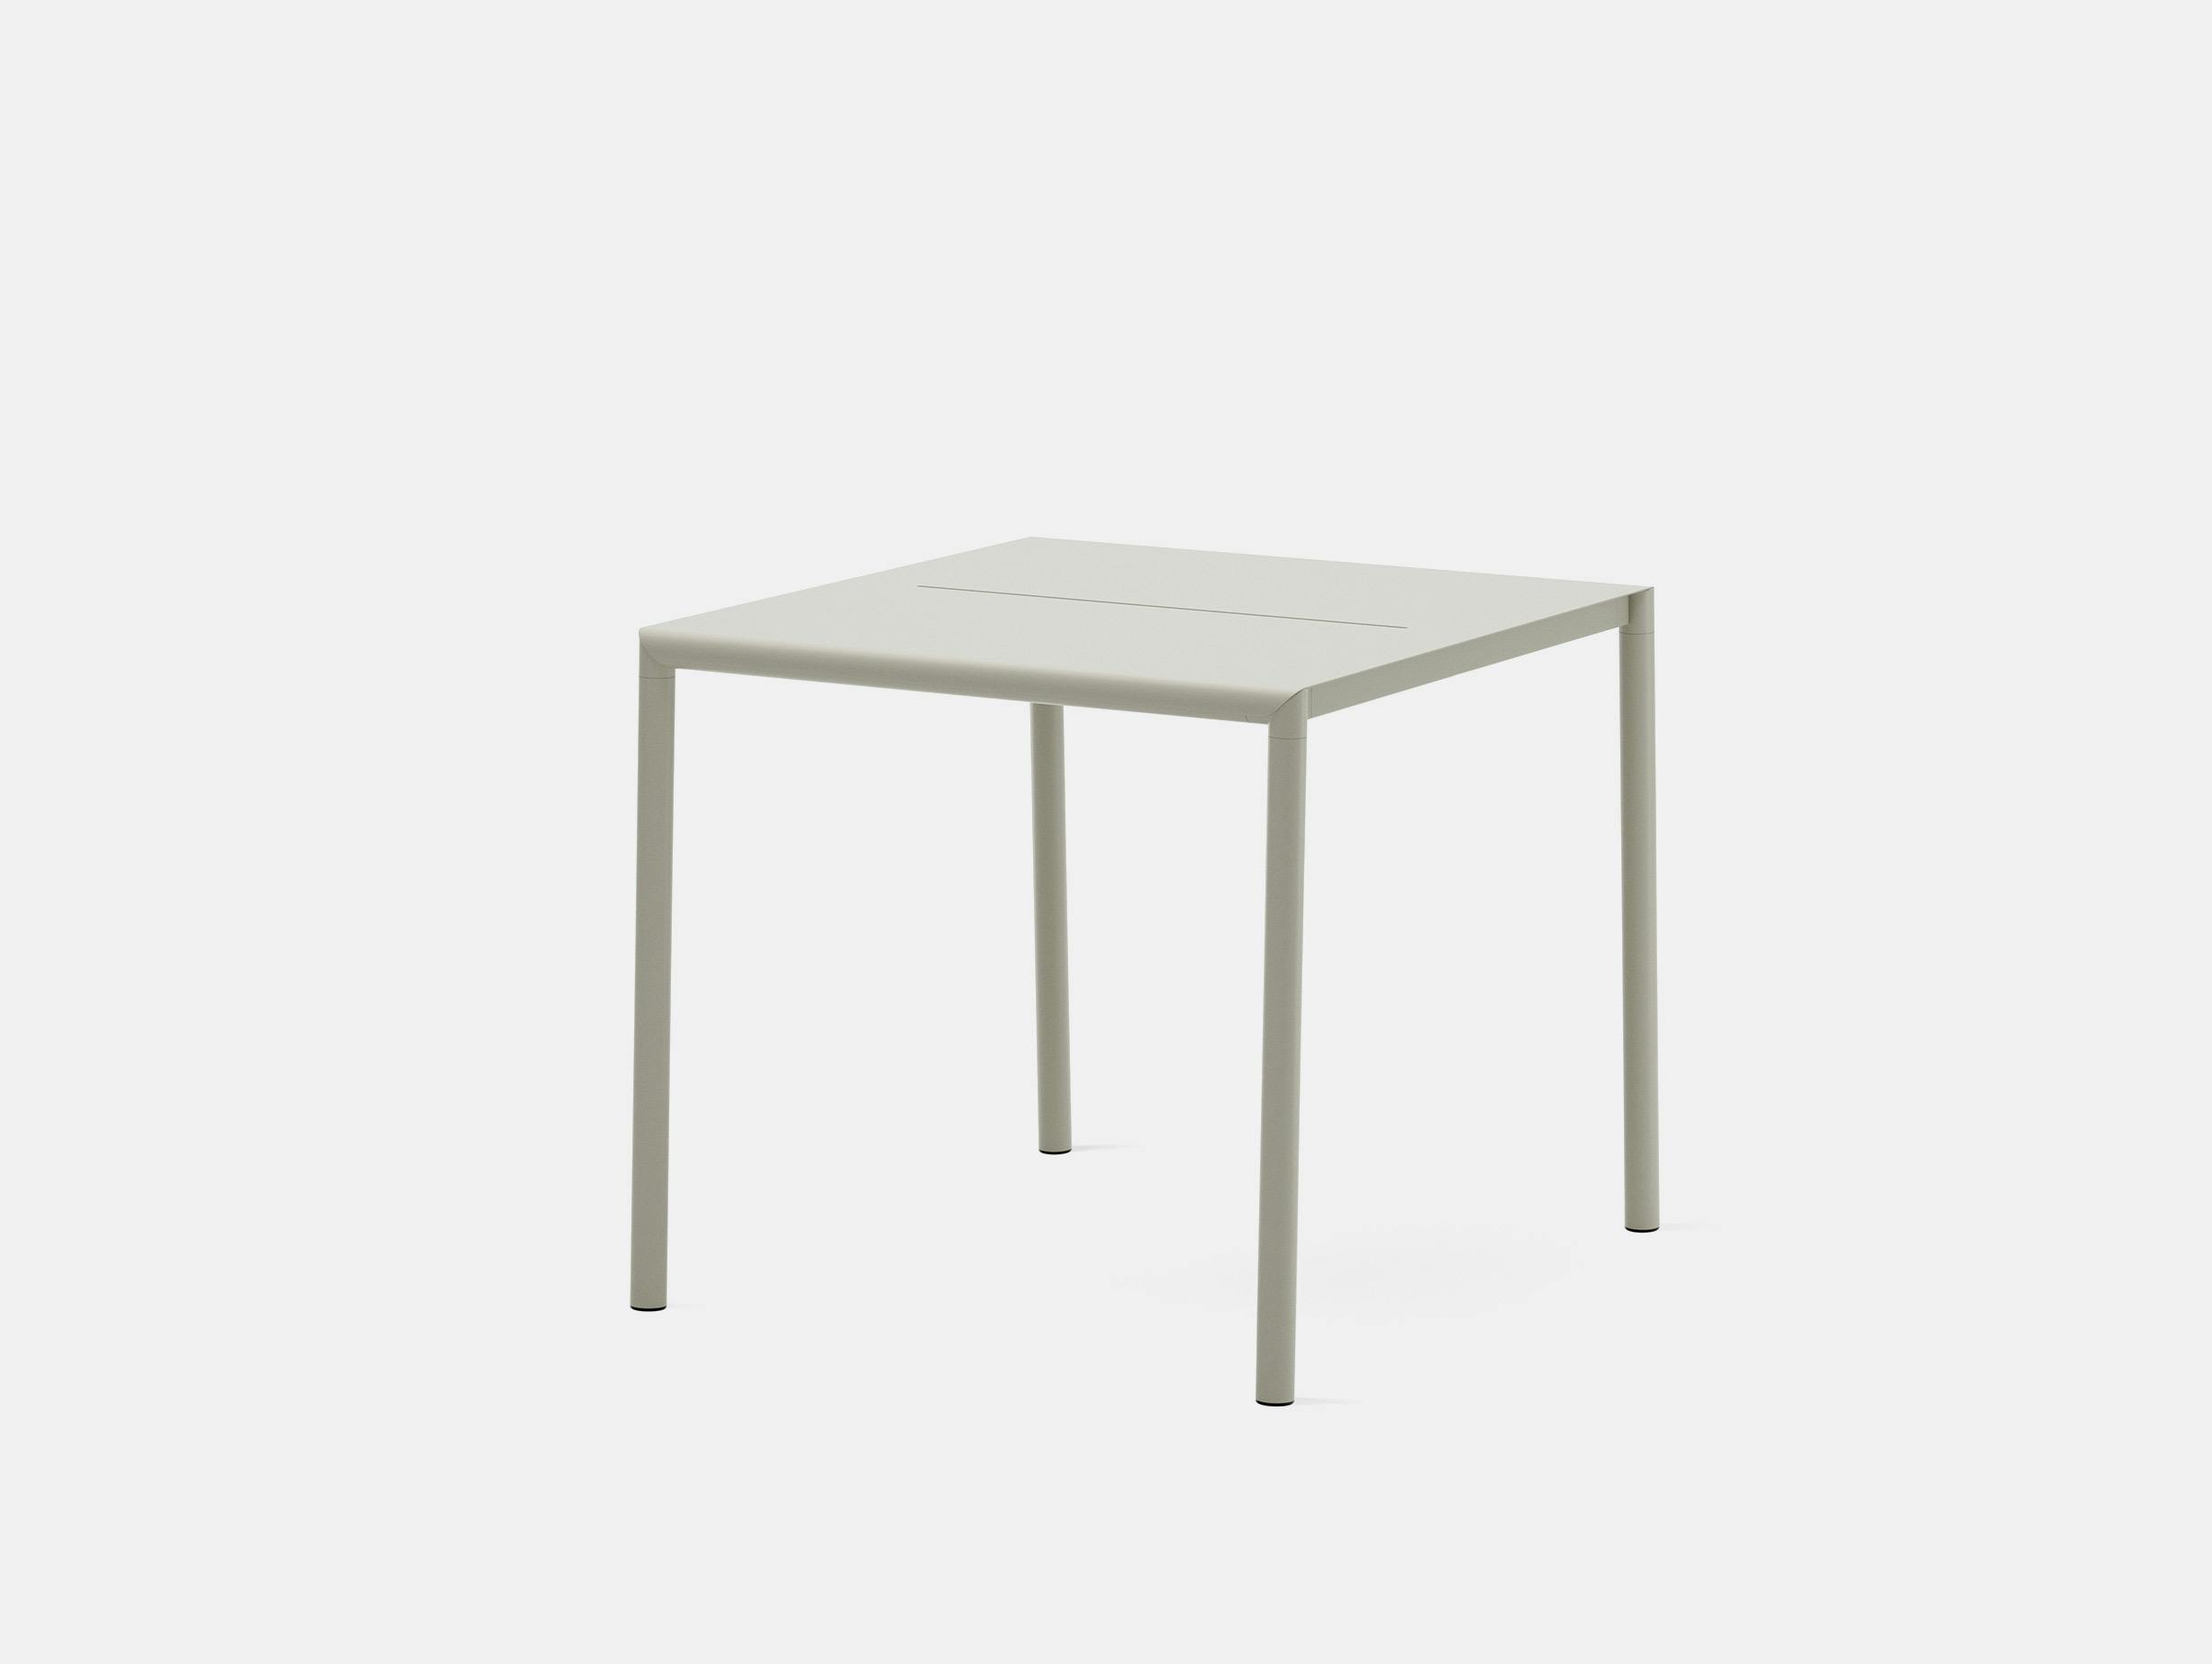 New works hannes fritz may table square light grey